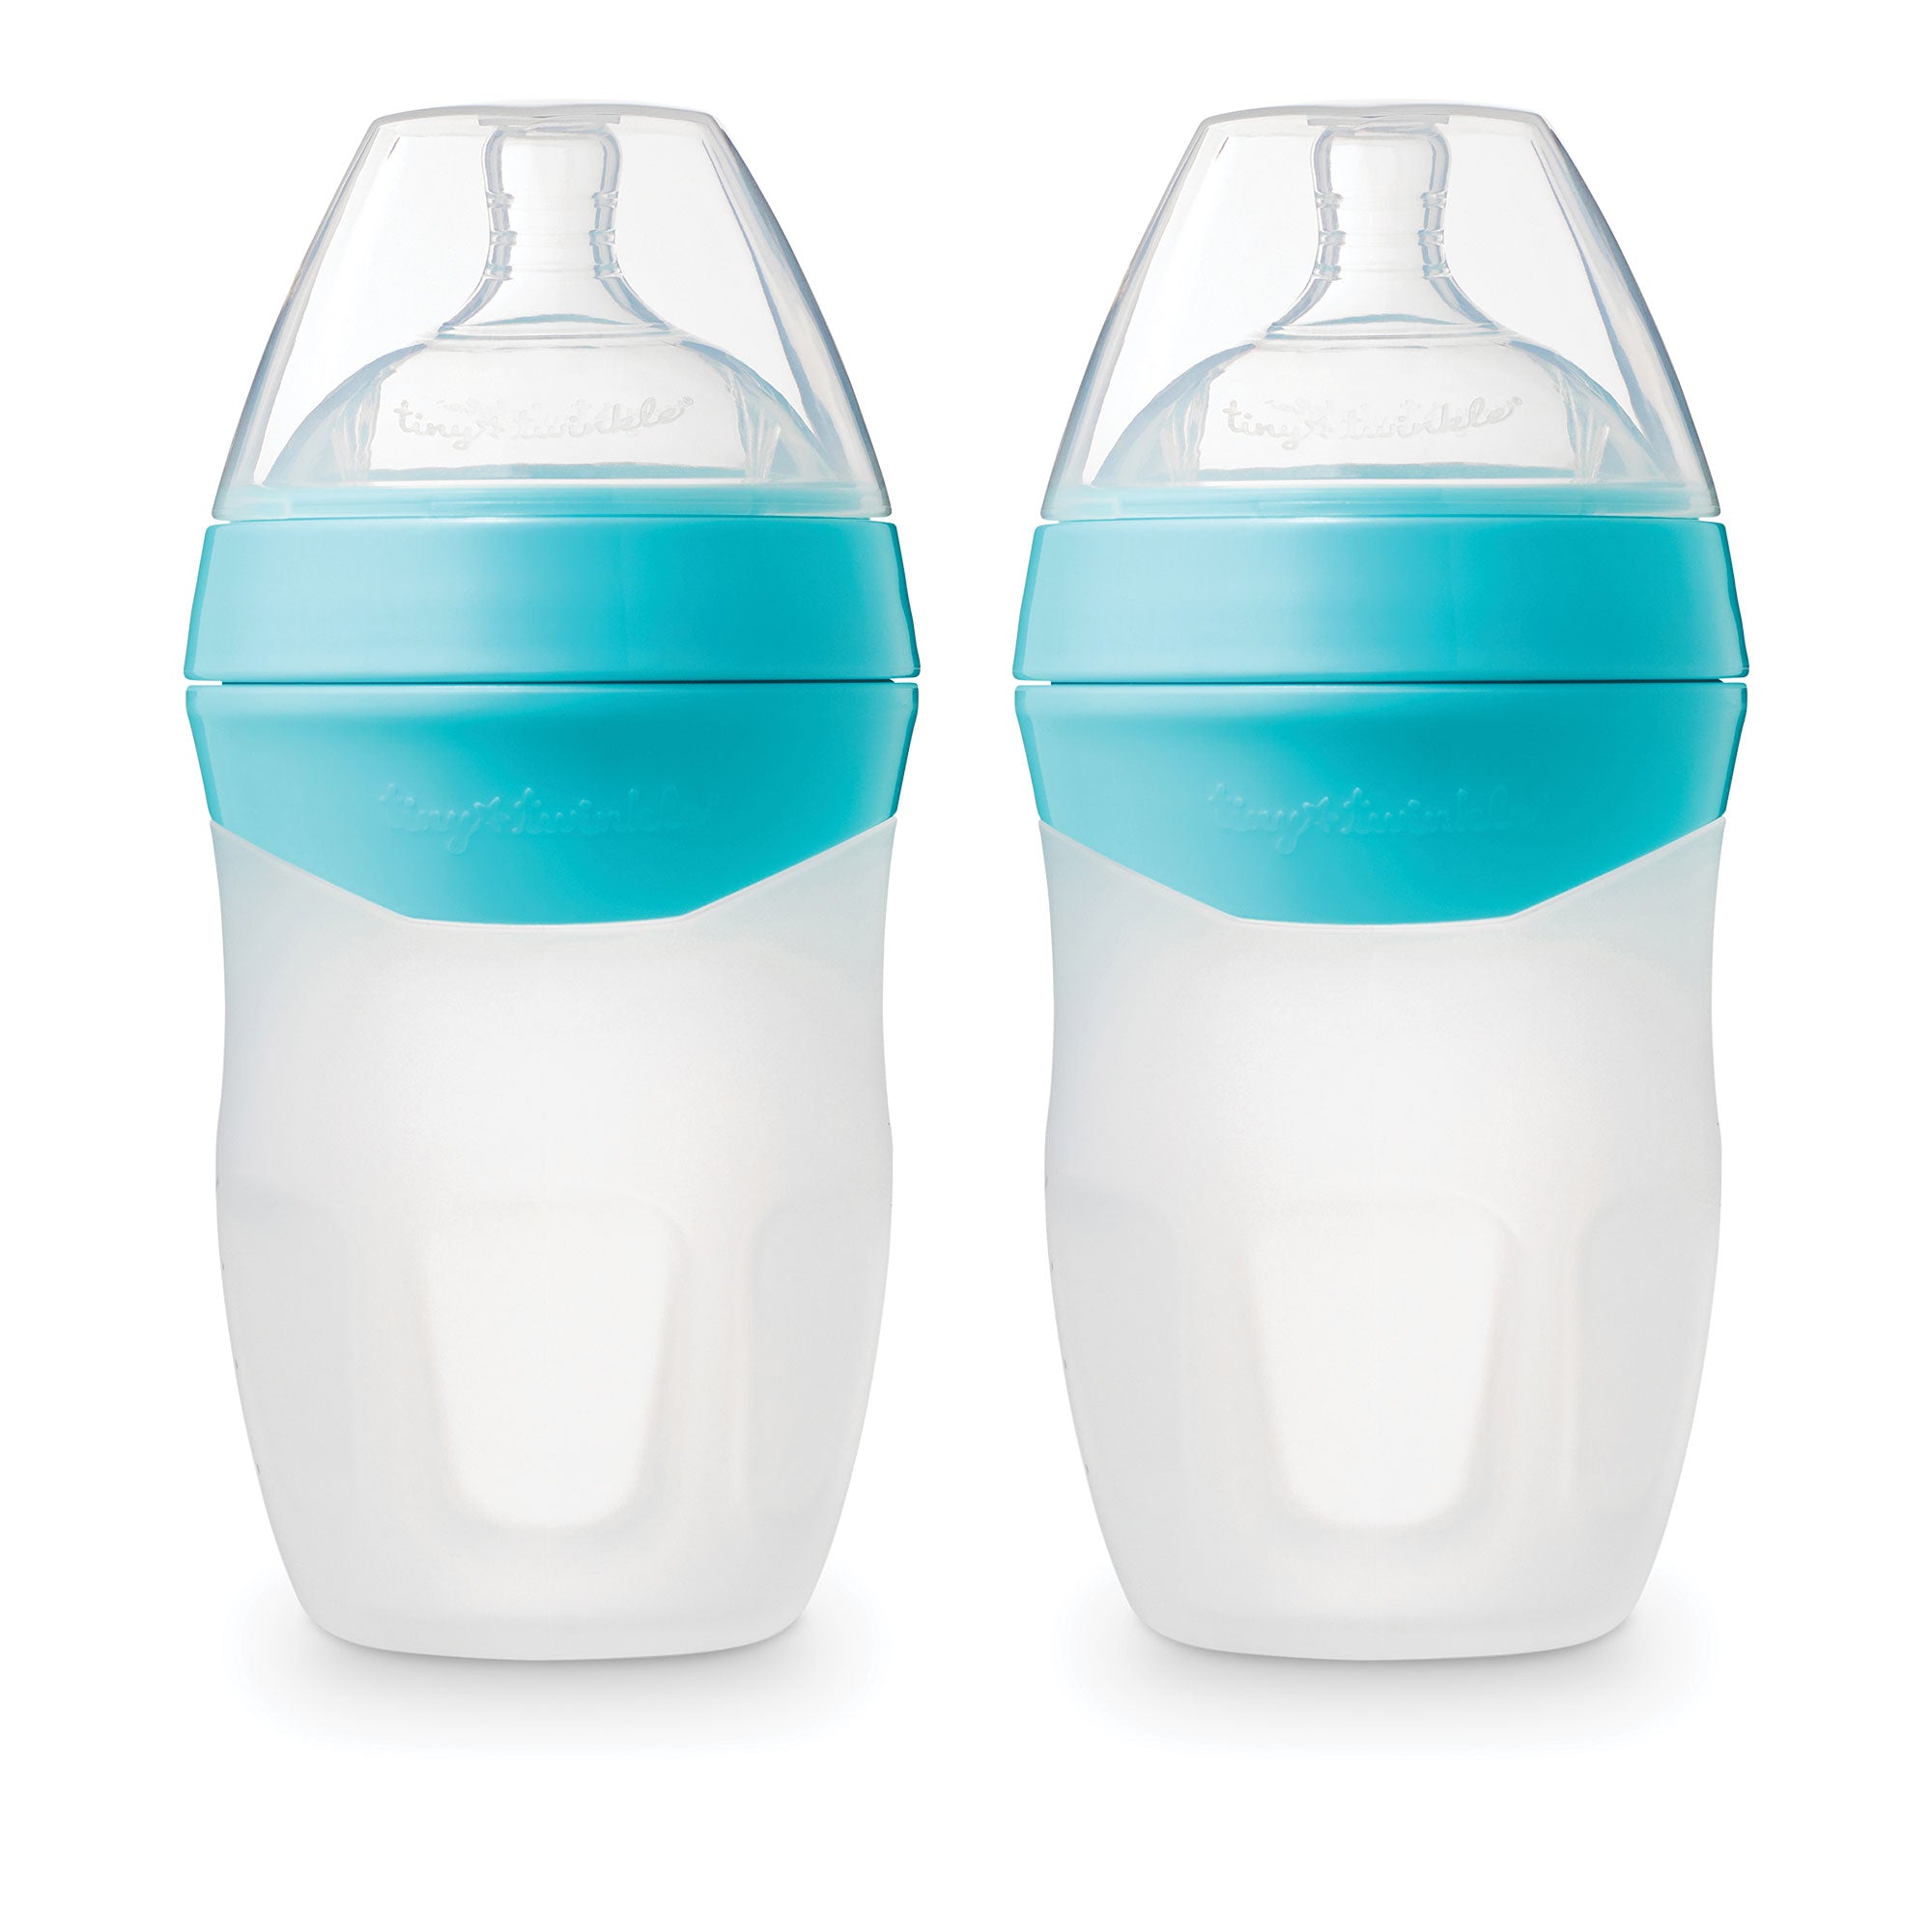 Silicone Baby Bottles